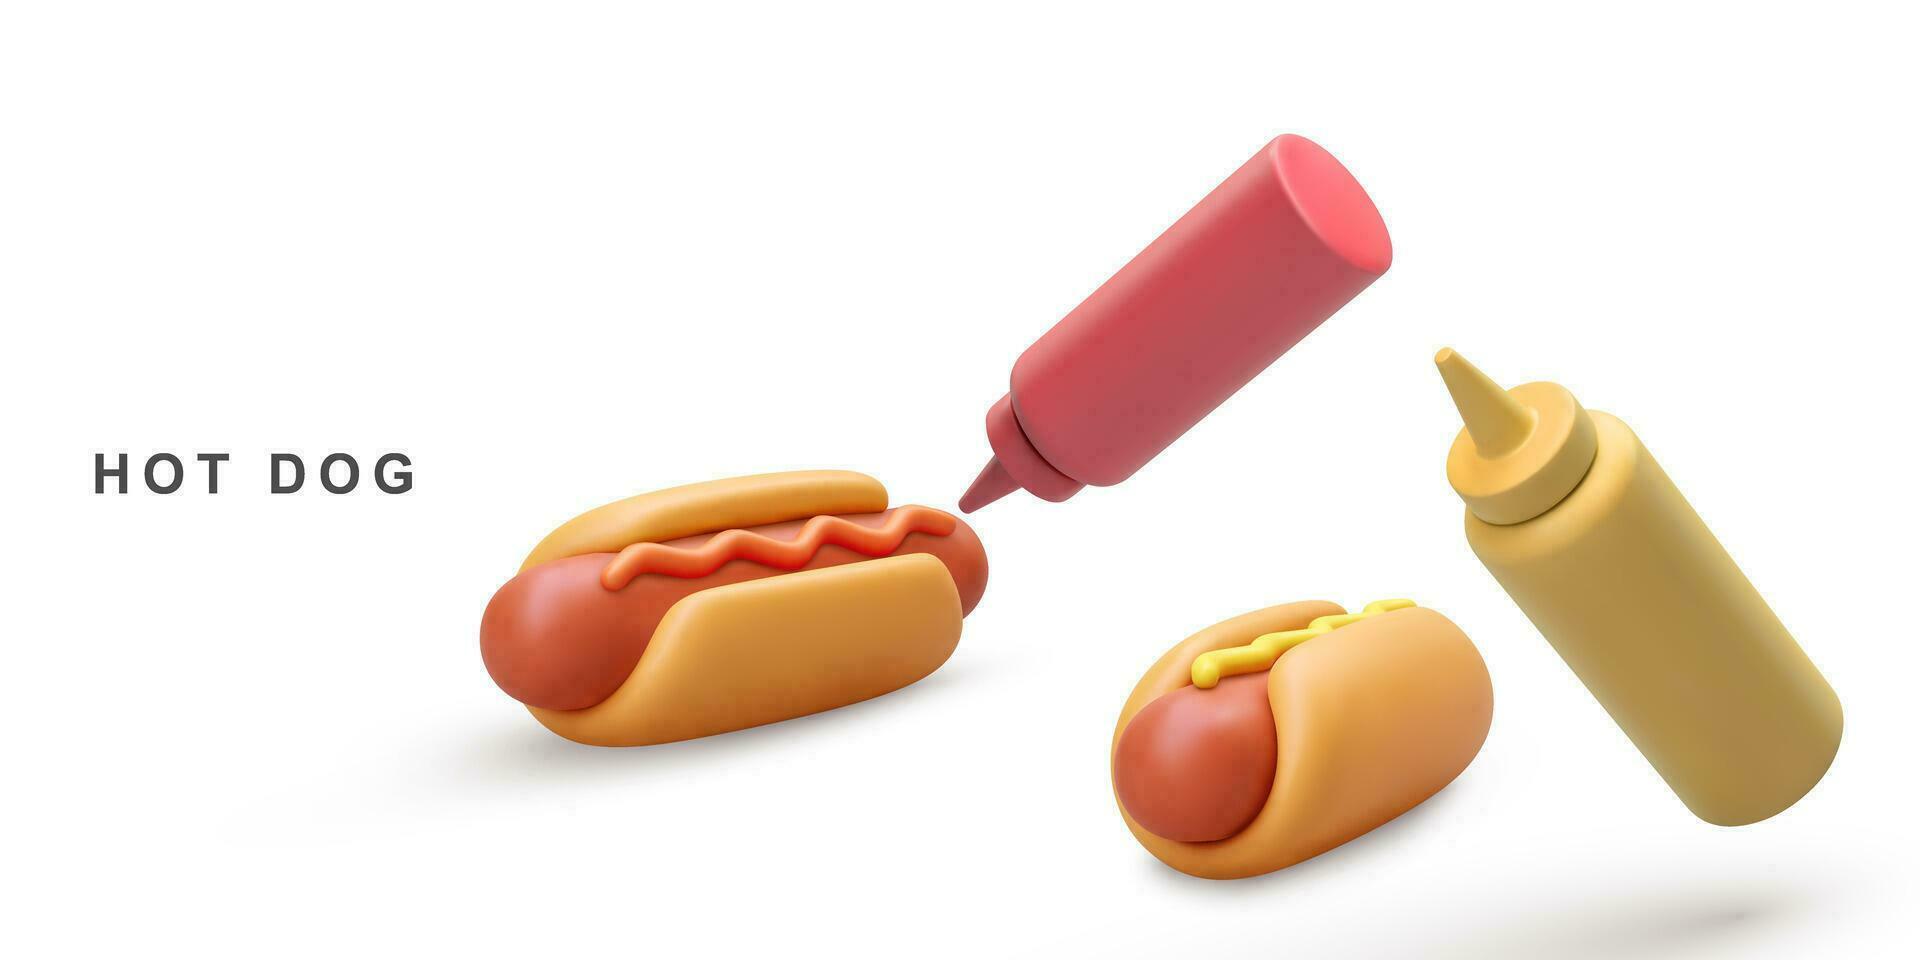 3d two Hot Dog and ketchup, mustard ketchup on white background. Vector illustration.